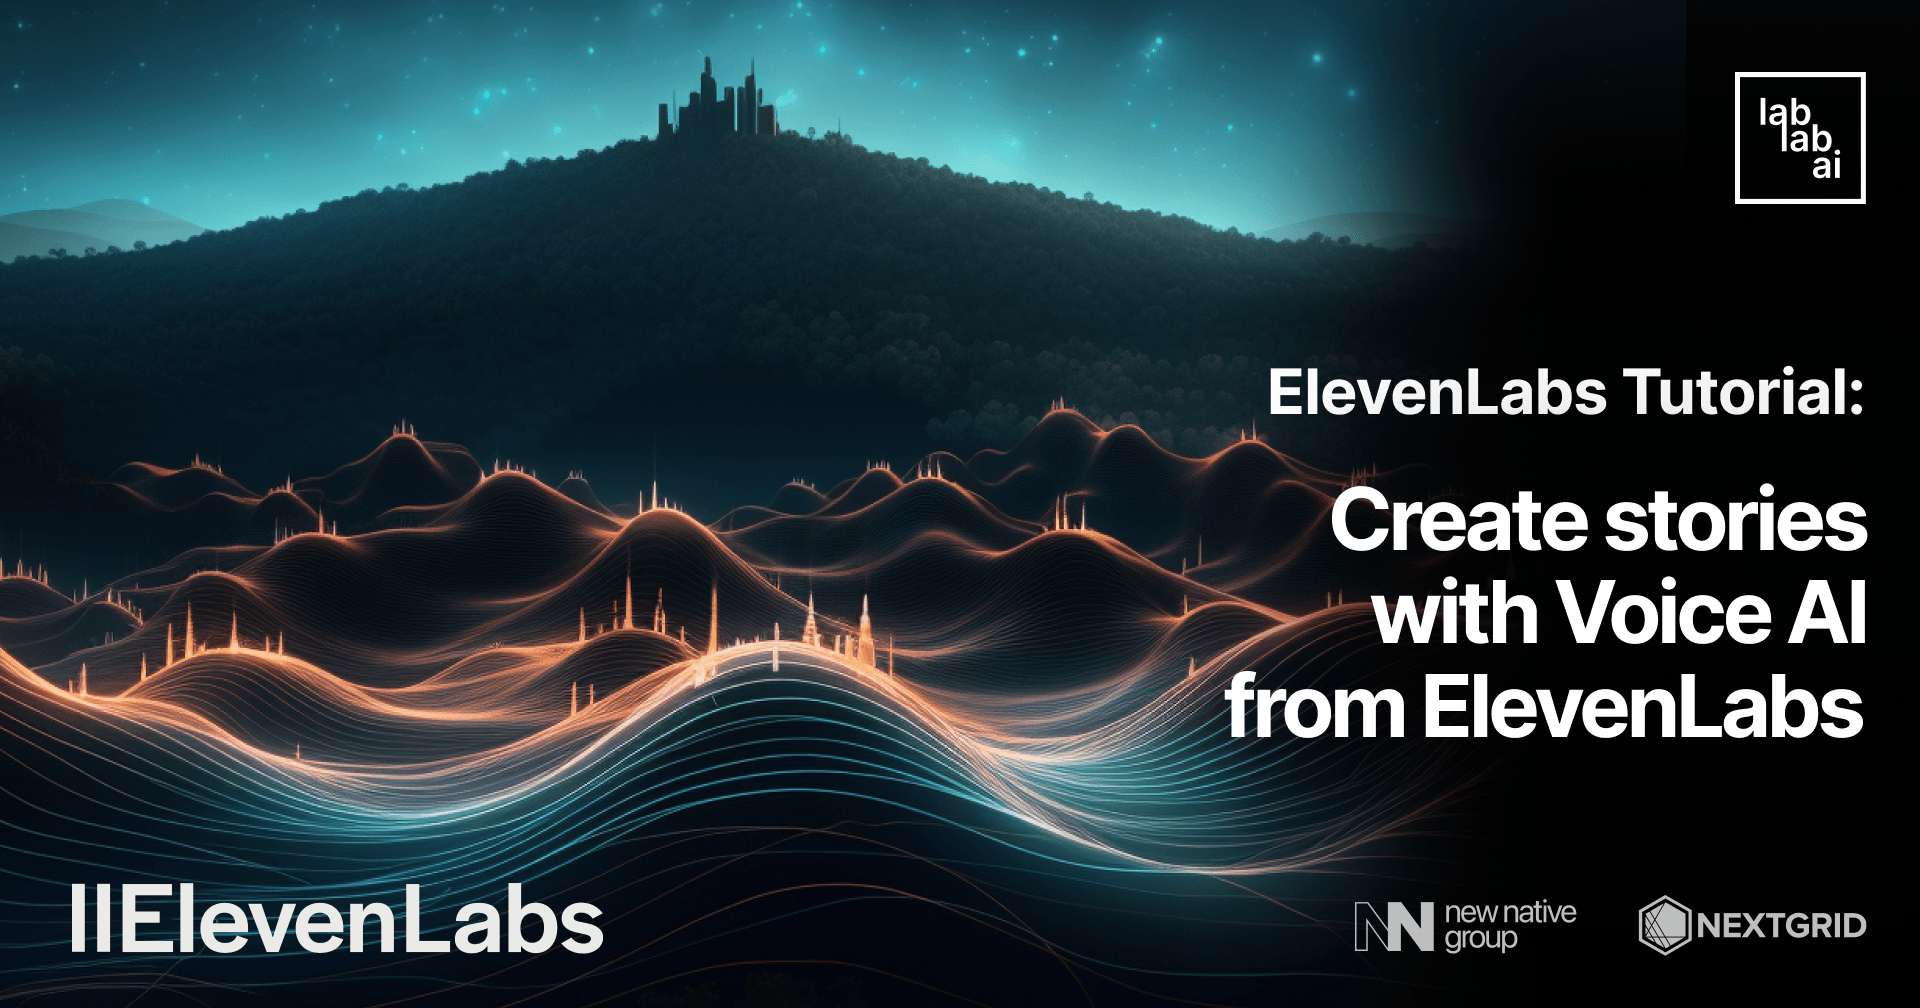 ElevenLabs Tutorial: Create stories with Voice AI from ElevenLabs